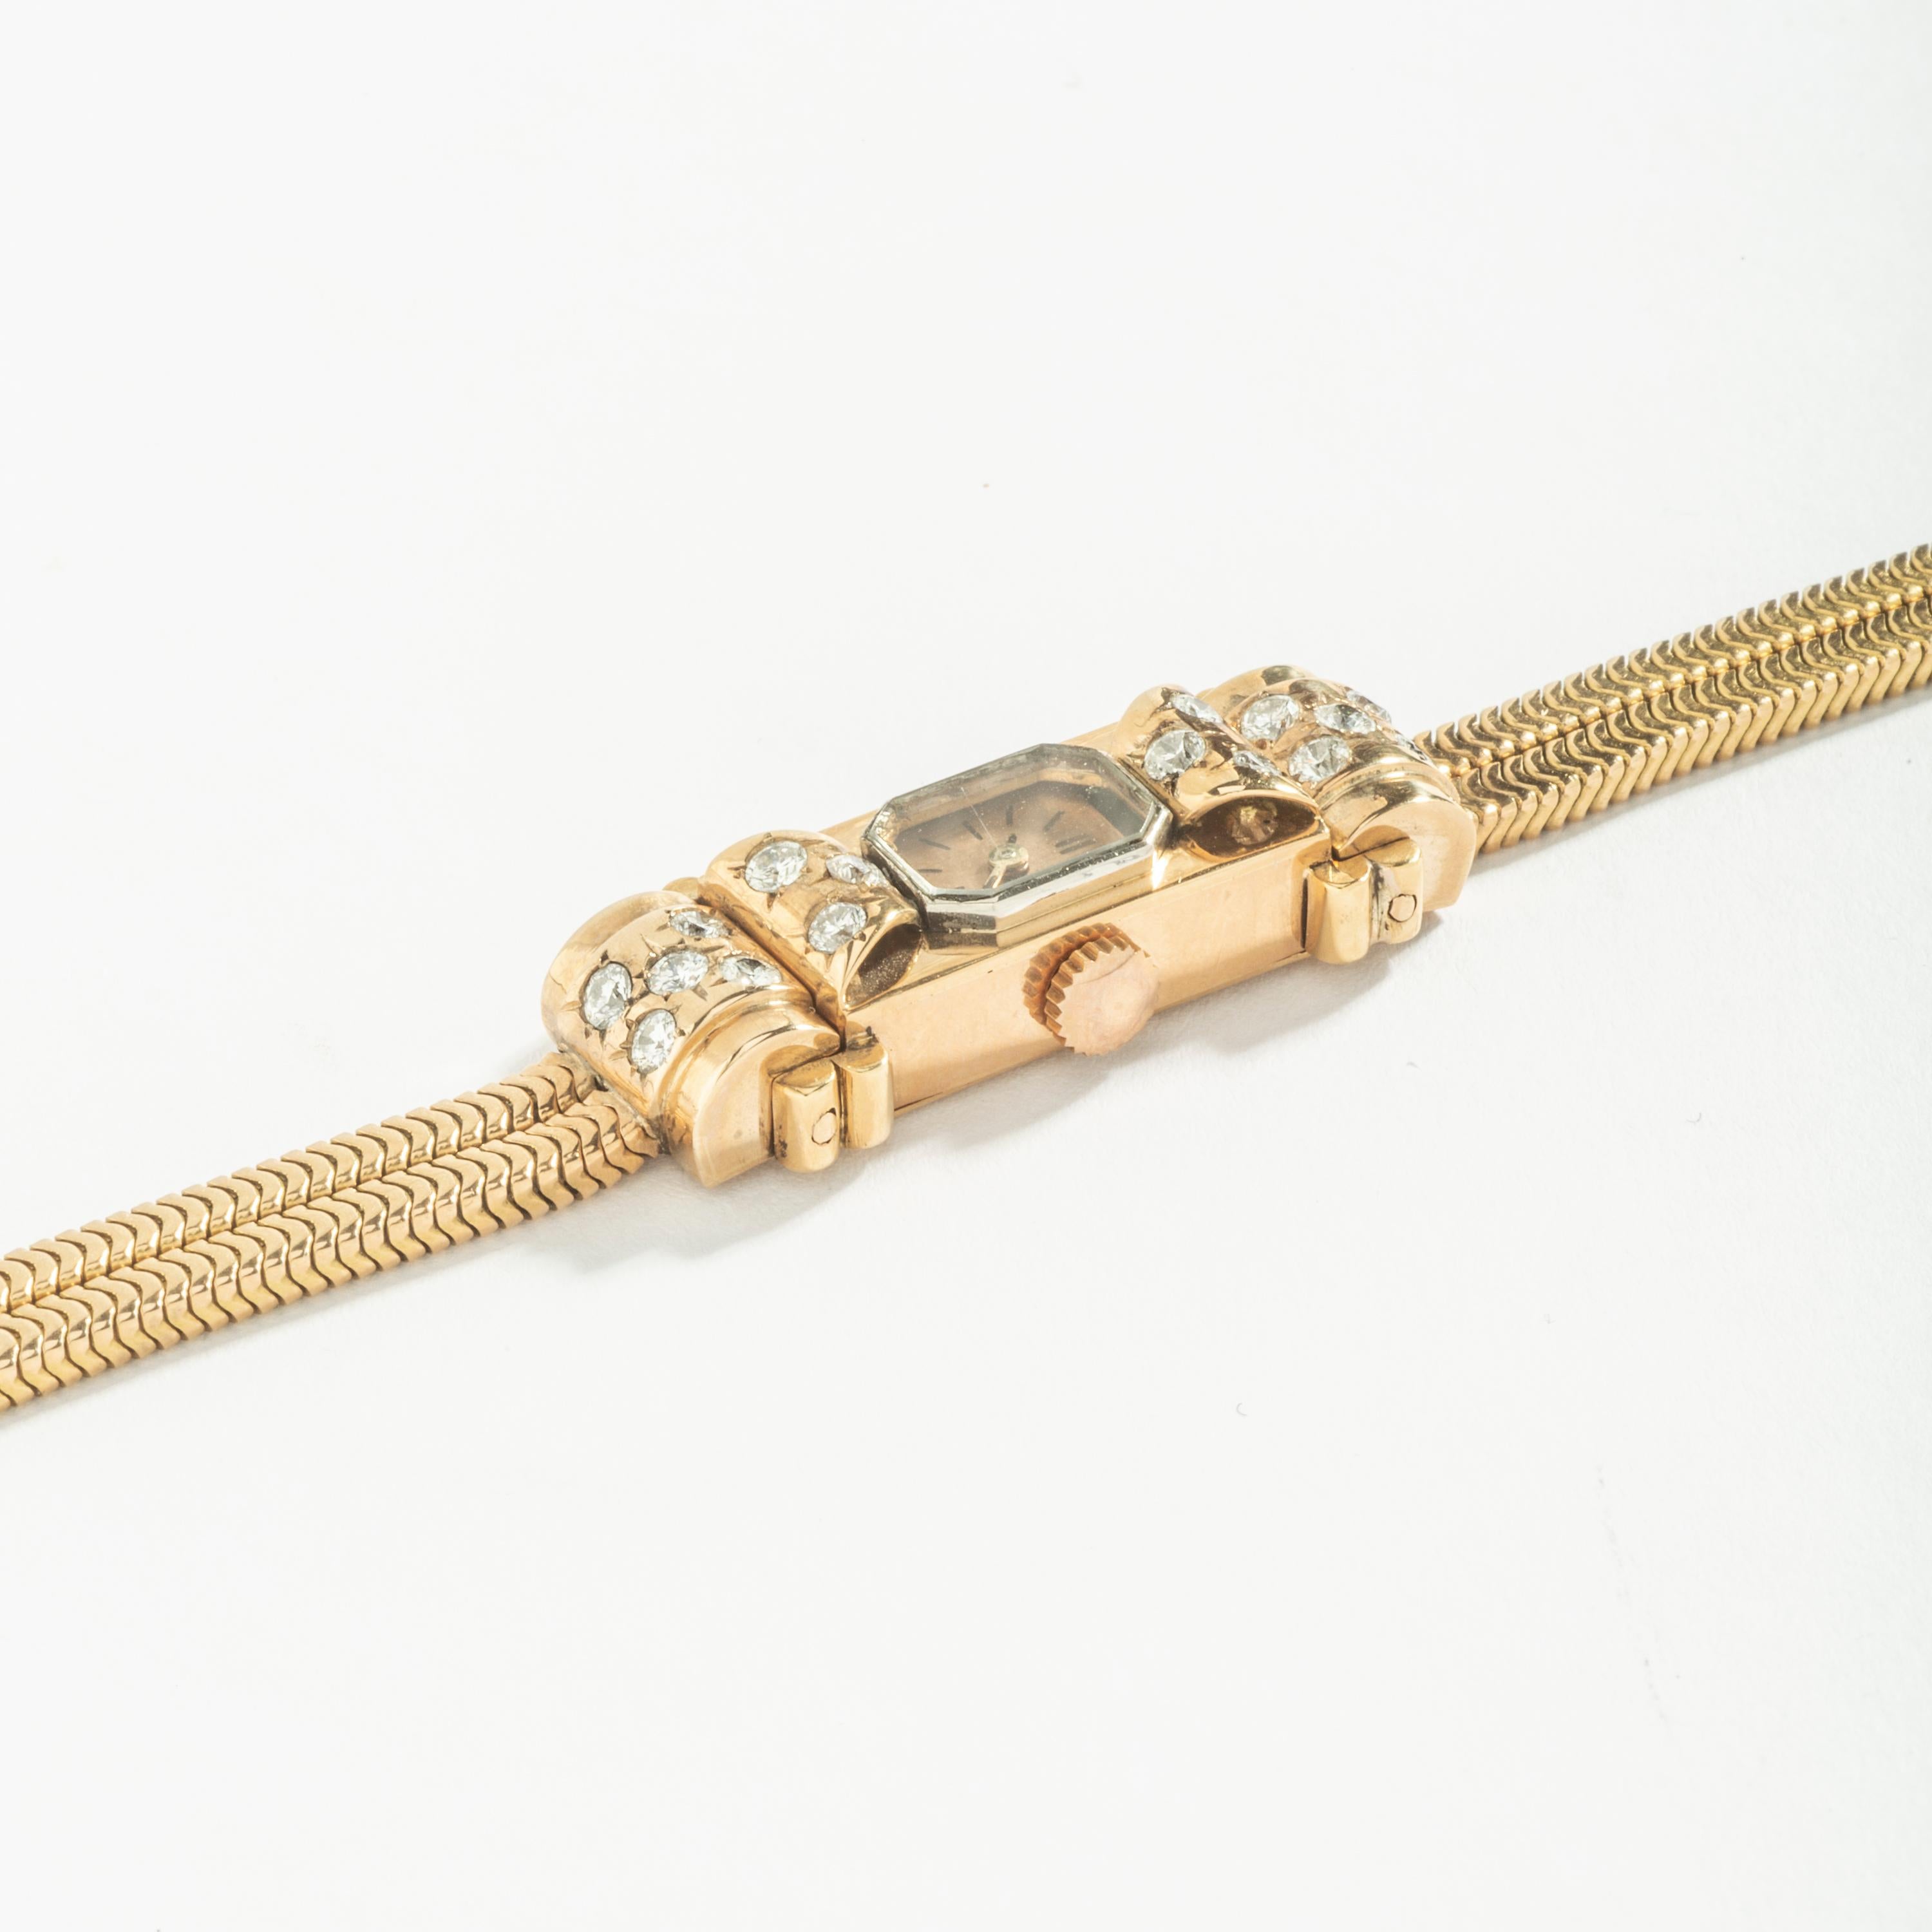 Art Deco Diamond on Yellow Gold 18k Wristwatch. Snake skin bracelet.
Circa 1935.

The watch has not been tested to determine the accuracy of its timekeeping. Please note that we do not guarantee the future working of the movement and that a service